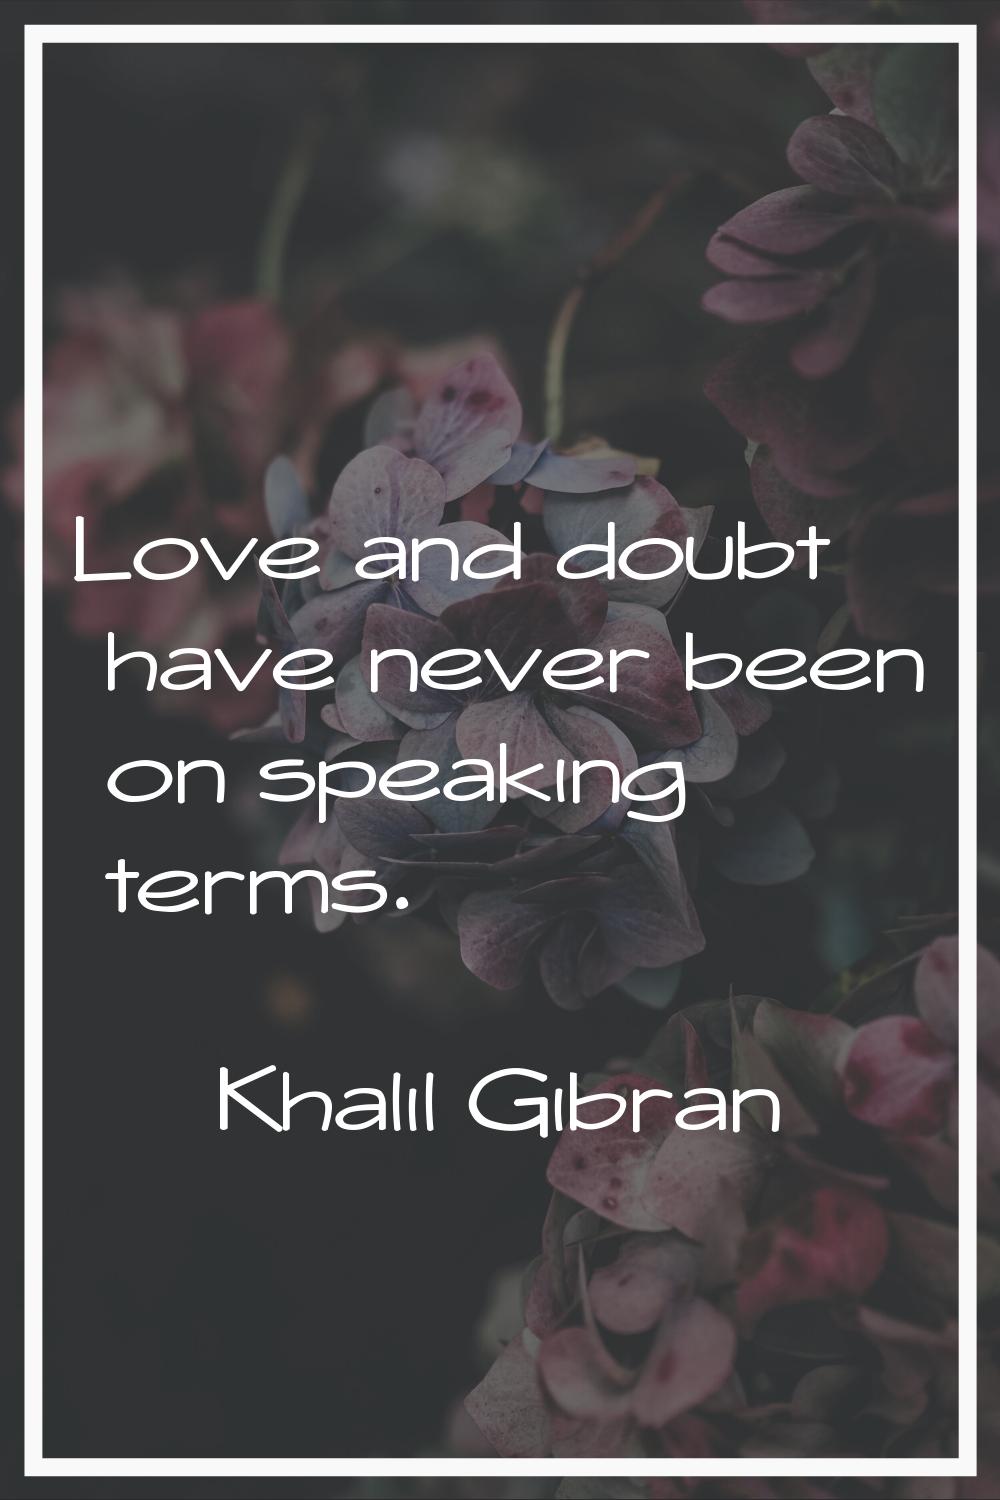 Love and doubt have never been on speaking terms.